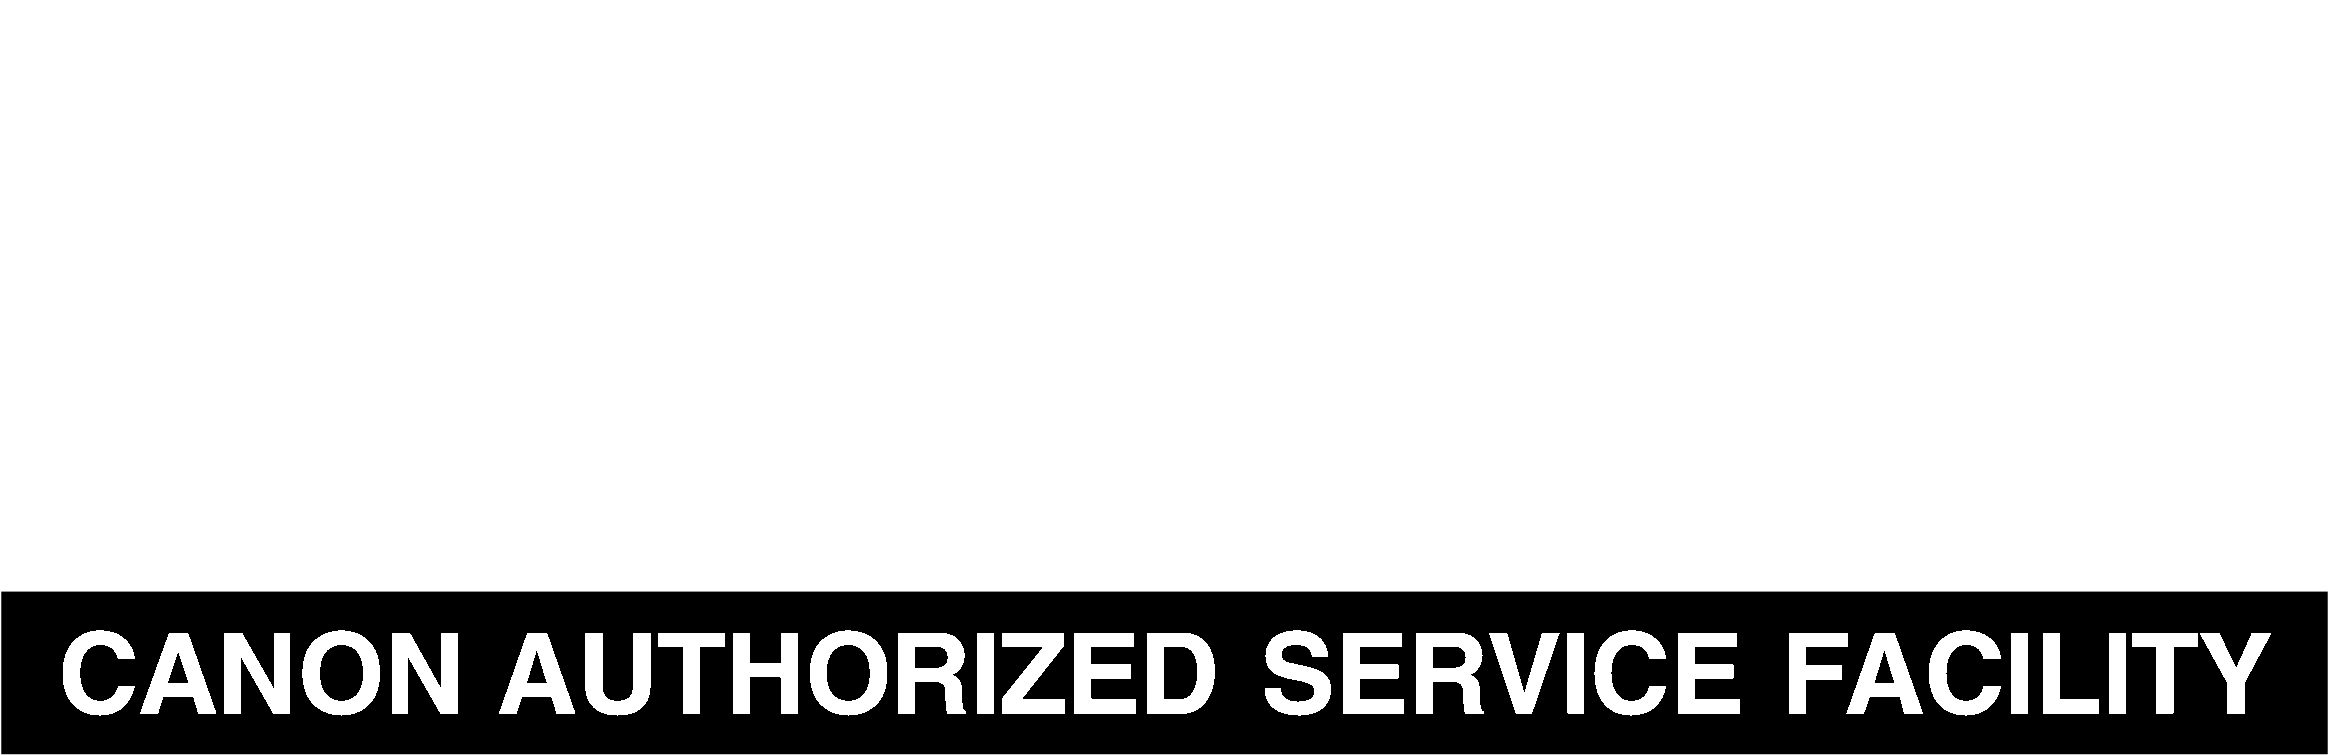 Canon Authorized Service Facility Logo PNG image